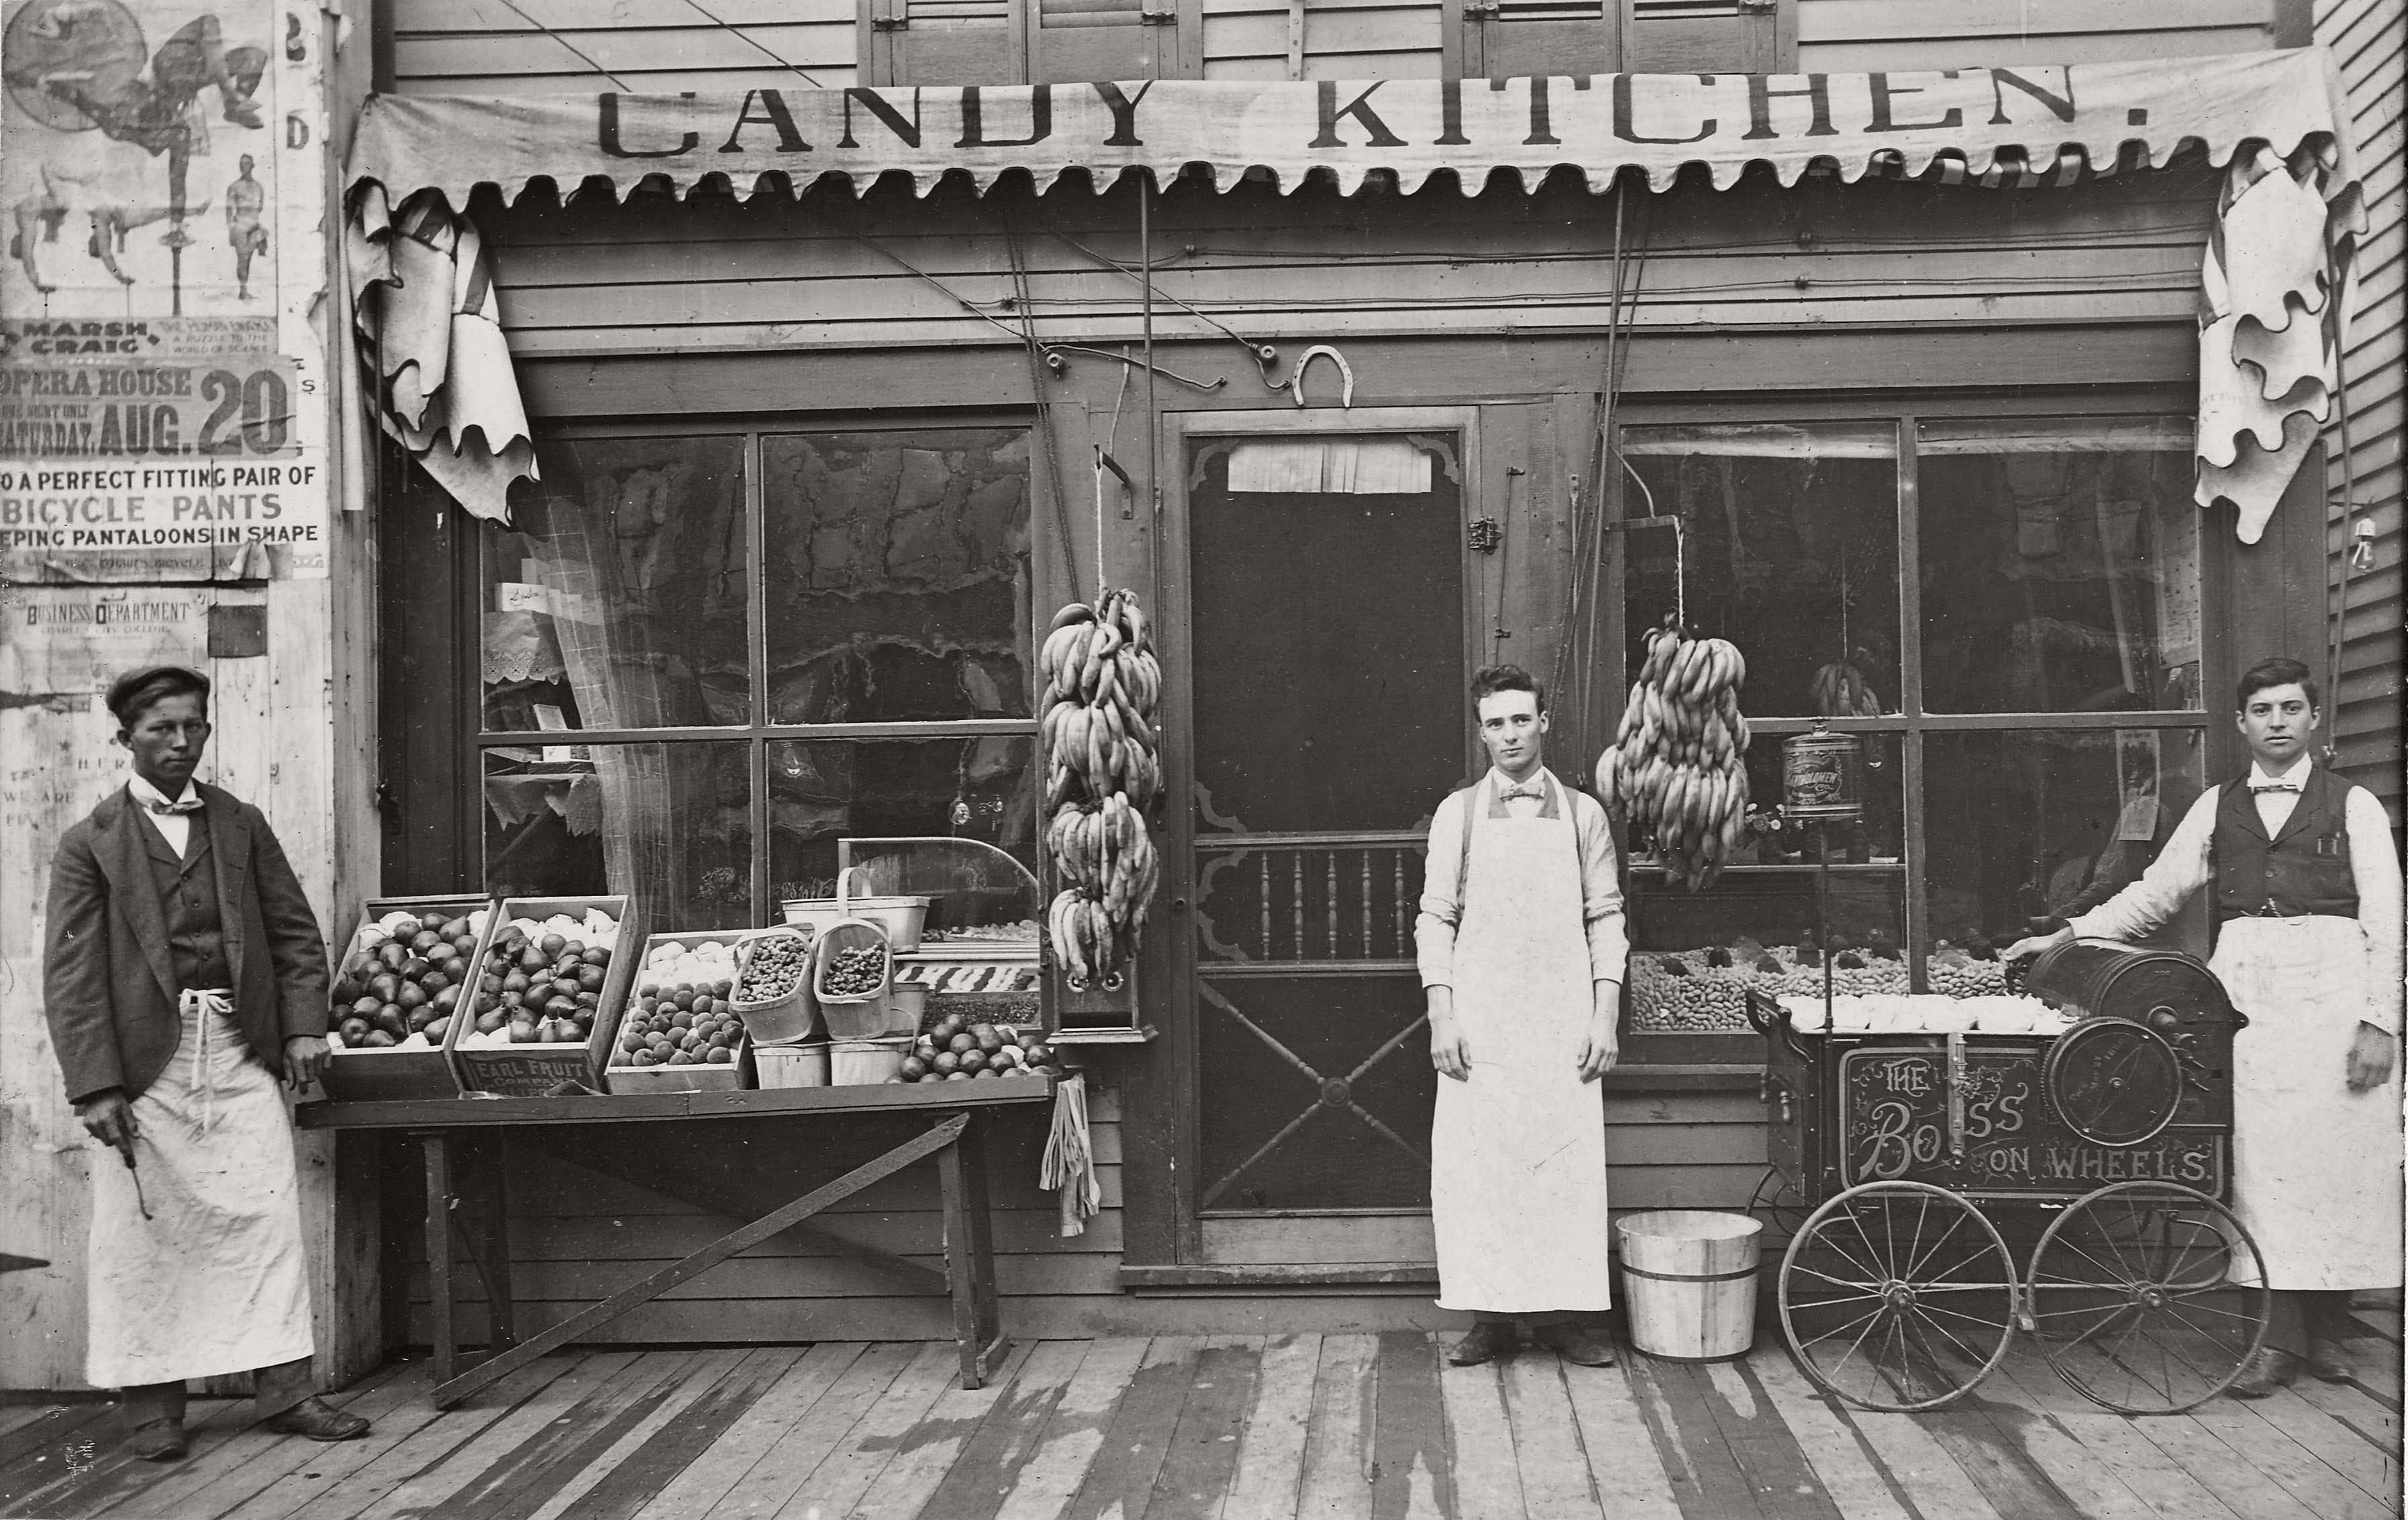 The Candy Kitchen located on Main Street across from the Hildreth Hotel and Opera House in downtown Charles City, Iowa, circa 1906. Glass negative.